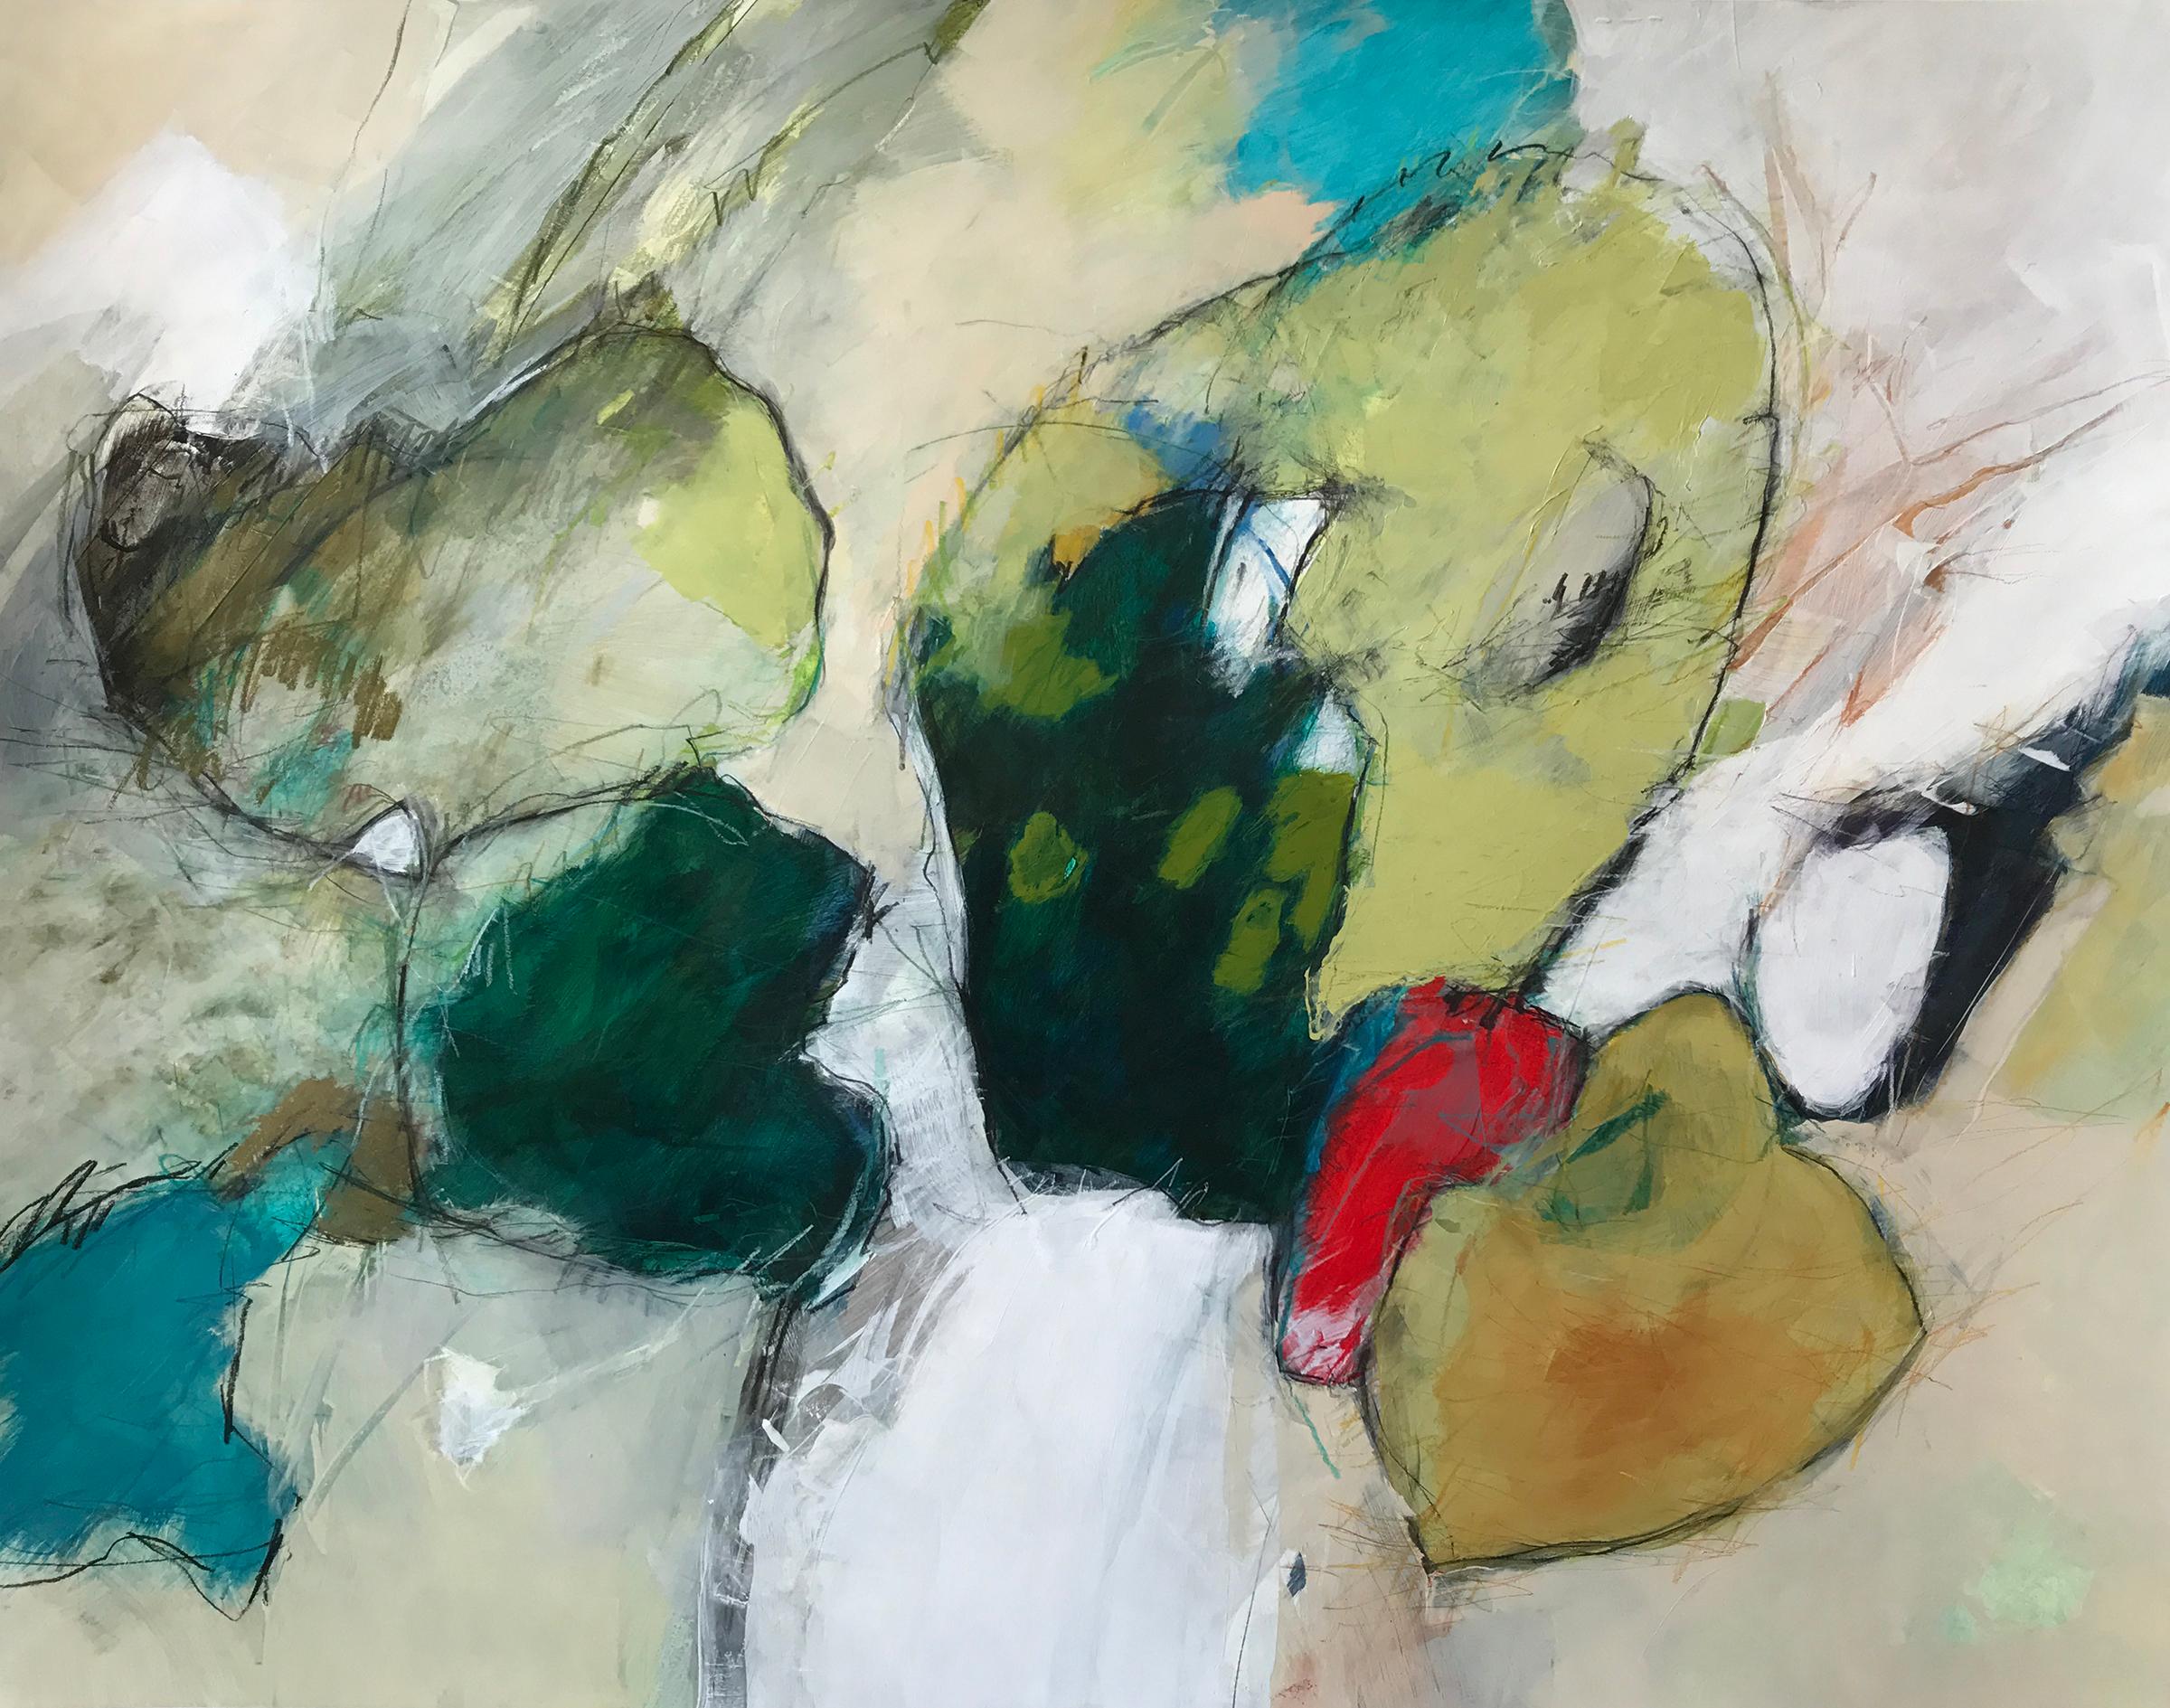 "Crypsis" features hues of green, red, yellow and teal.
Cynthia Knapp is inspired by the works of Joan Mitchell, Helen Frankenthaler and Grace Hartigan.

Atlanta based artist, Cynthia Knapp was born in the Northeast United States and as a child